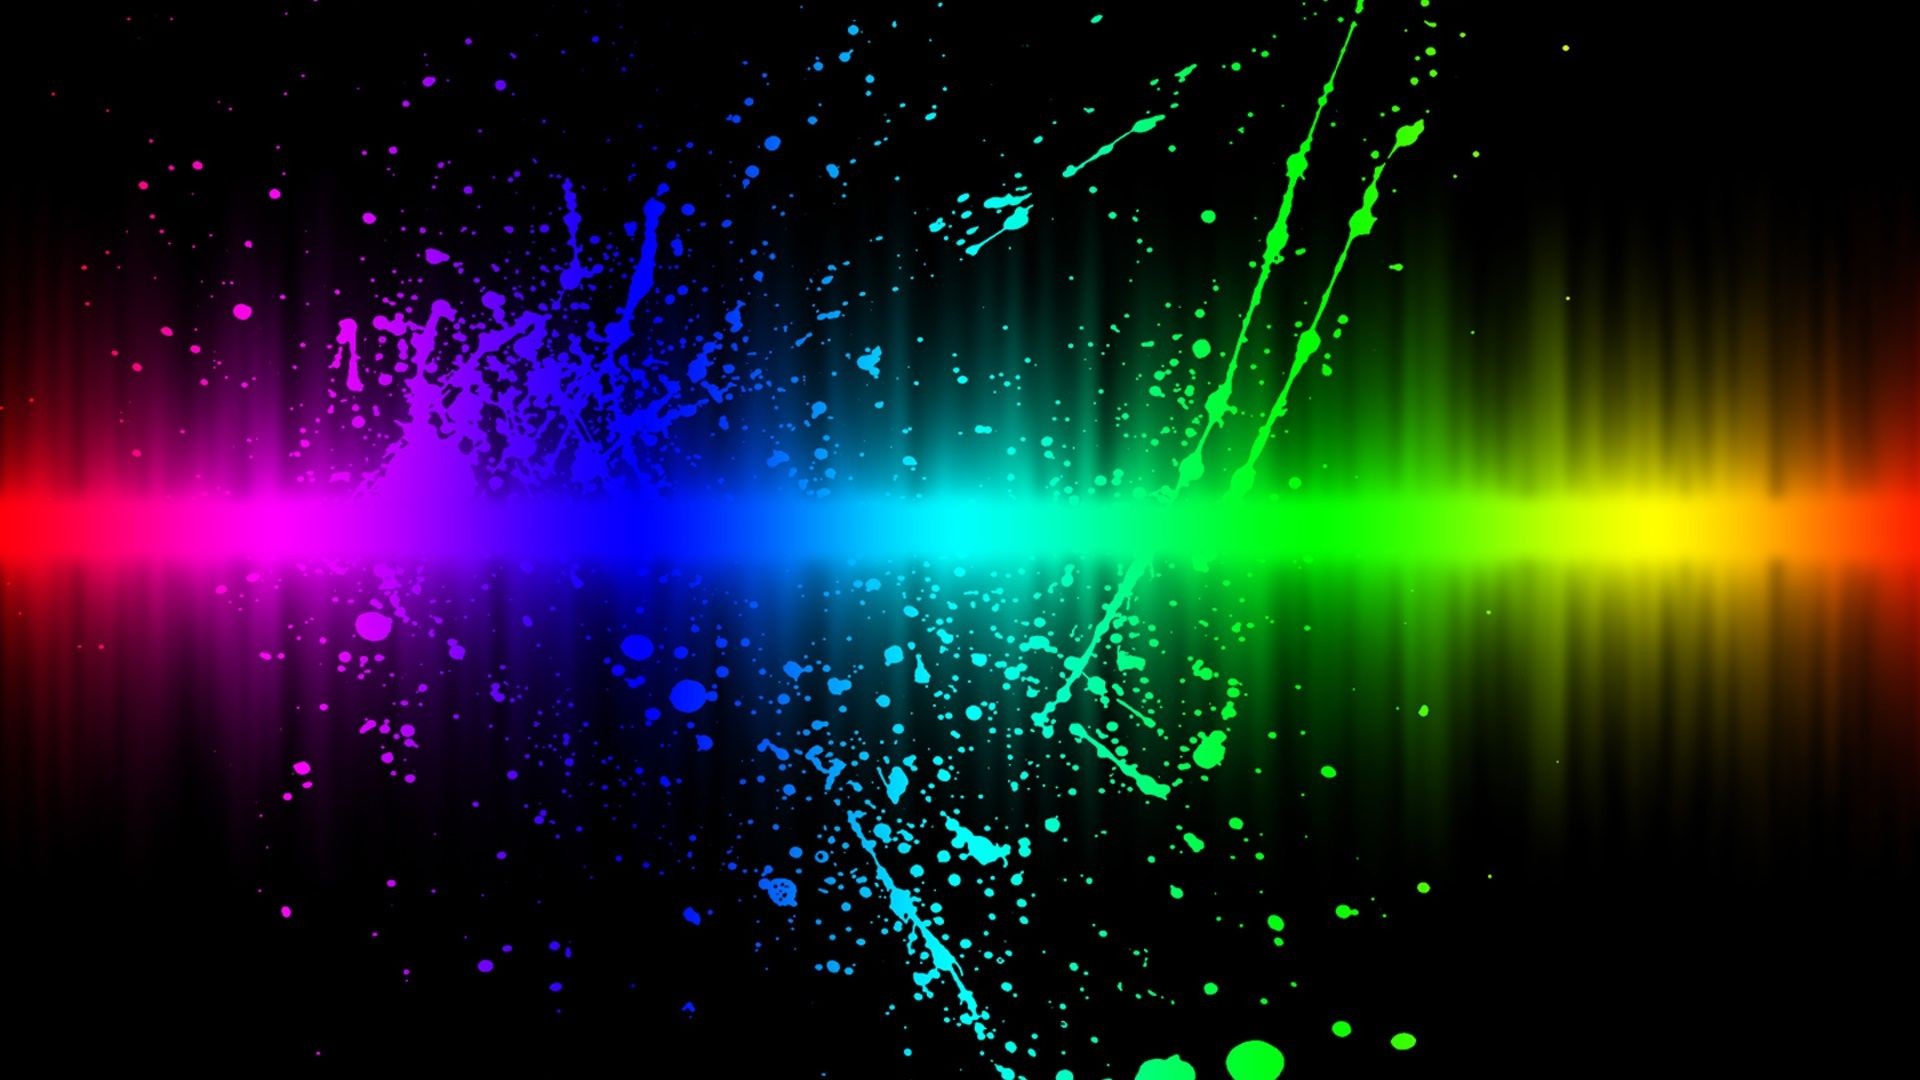 HD Wallpaper Rainbow Colors With Resolution 1920X1080 pixel. You can make this wallpaper for your Desktop Computer Backgrounds, Mac Wallpapers, Android Lock screen or iPhone Screensavers